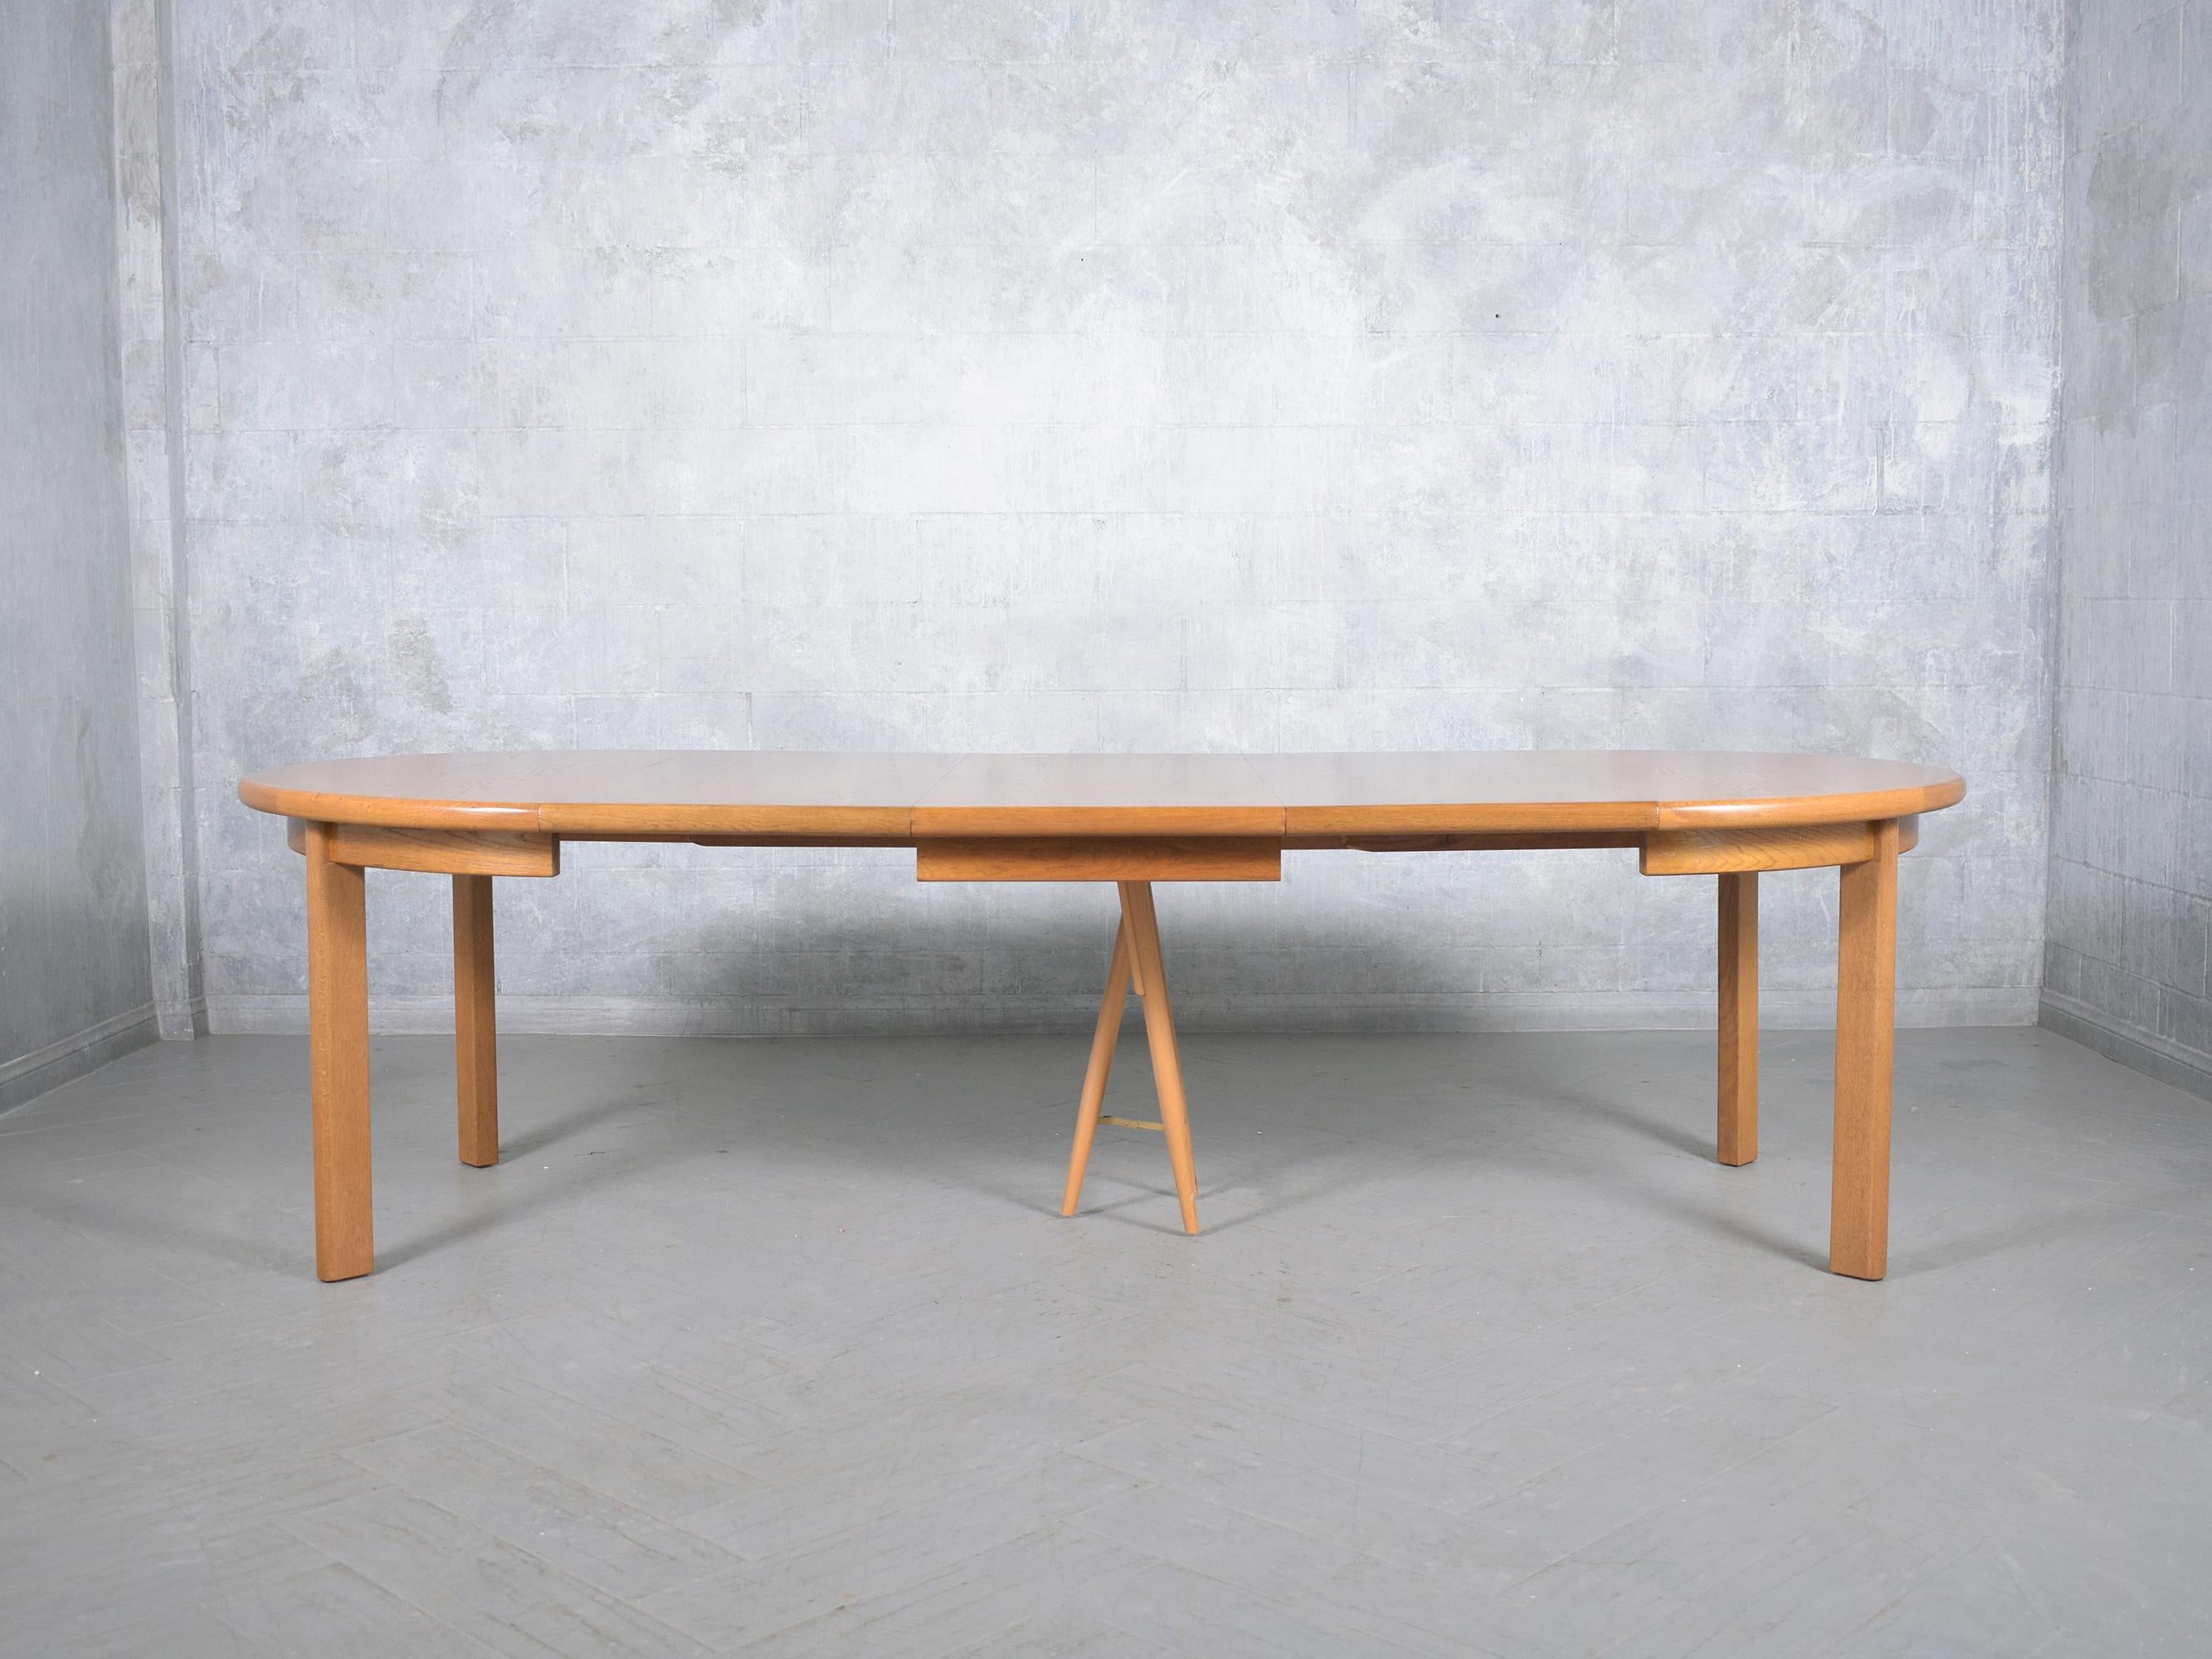 1970s Danish Modern Teak Dining Table with Extendable Leaves For Sale 9